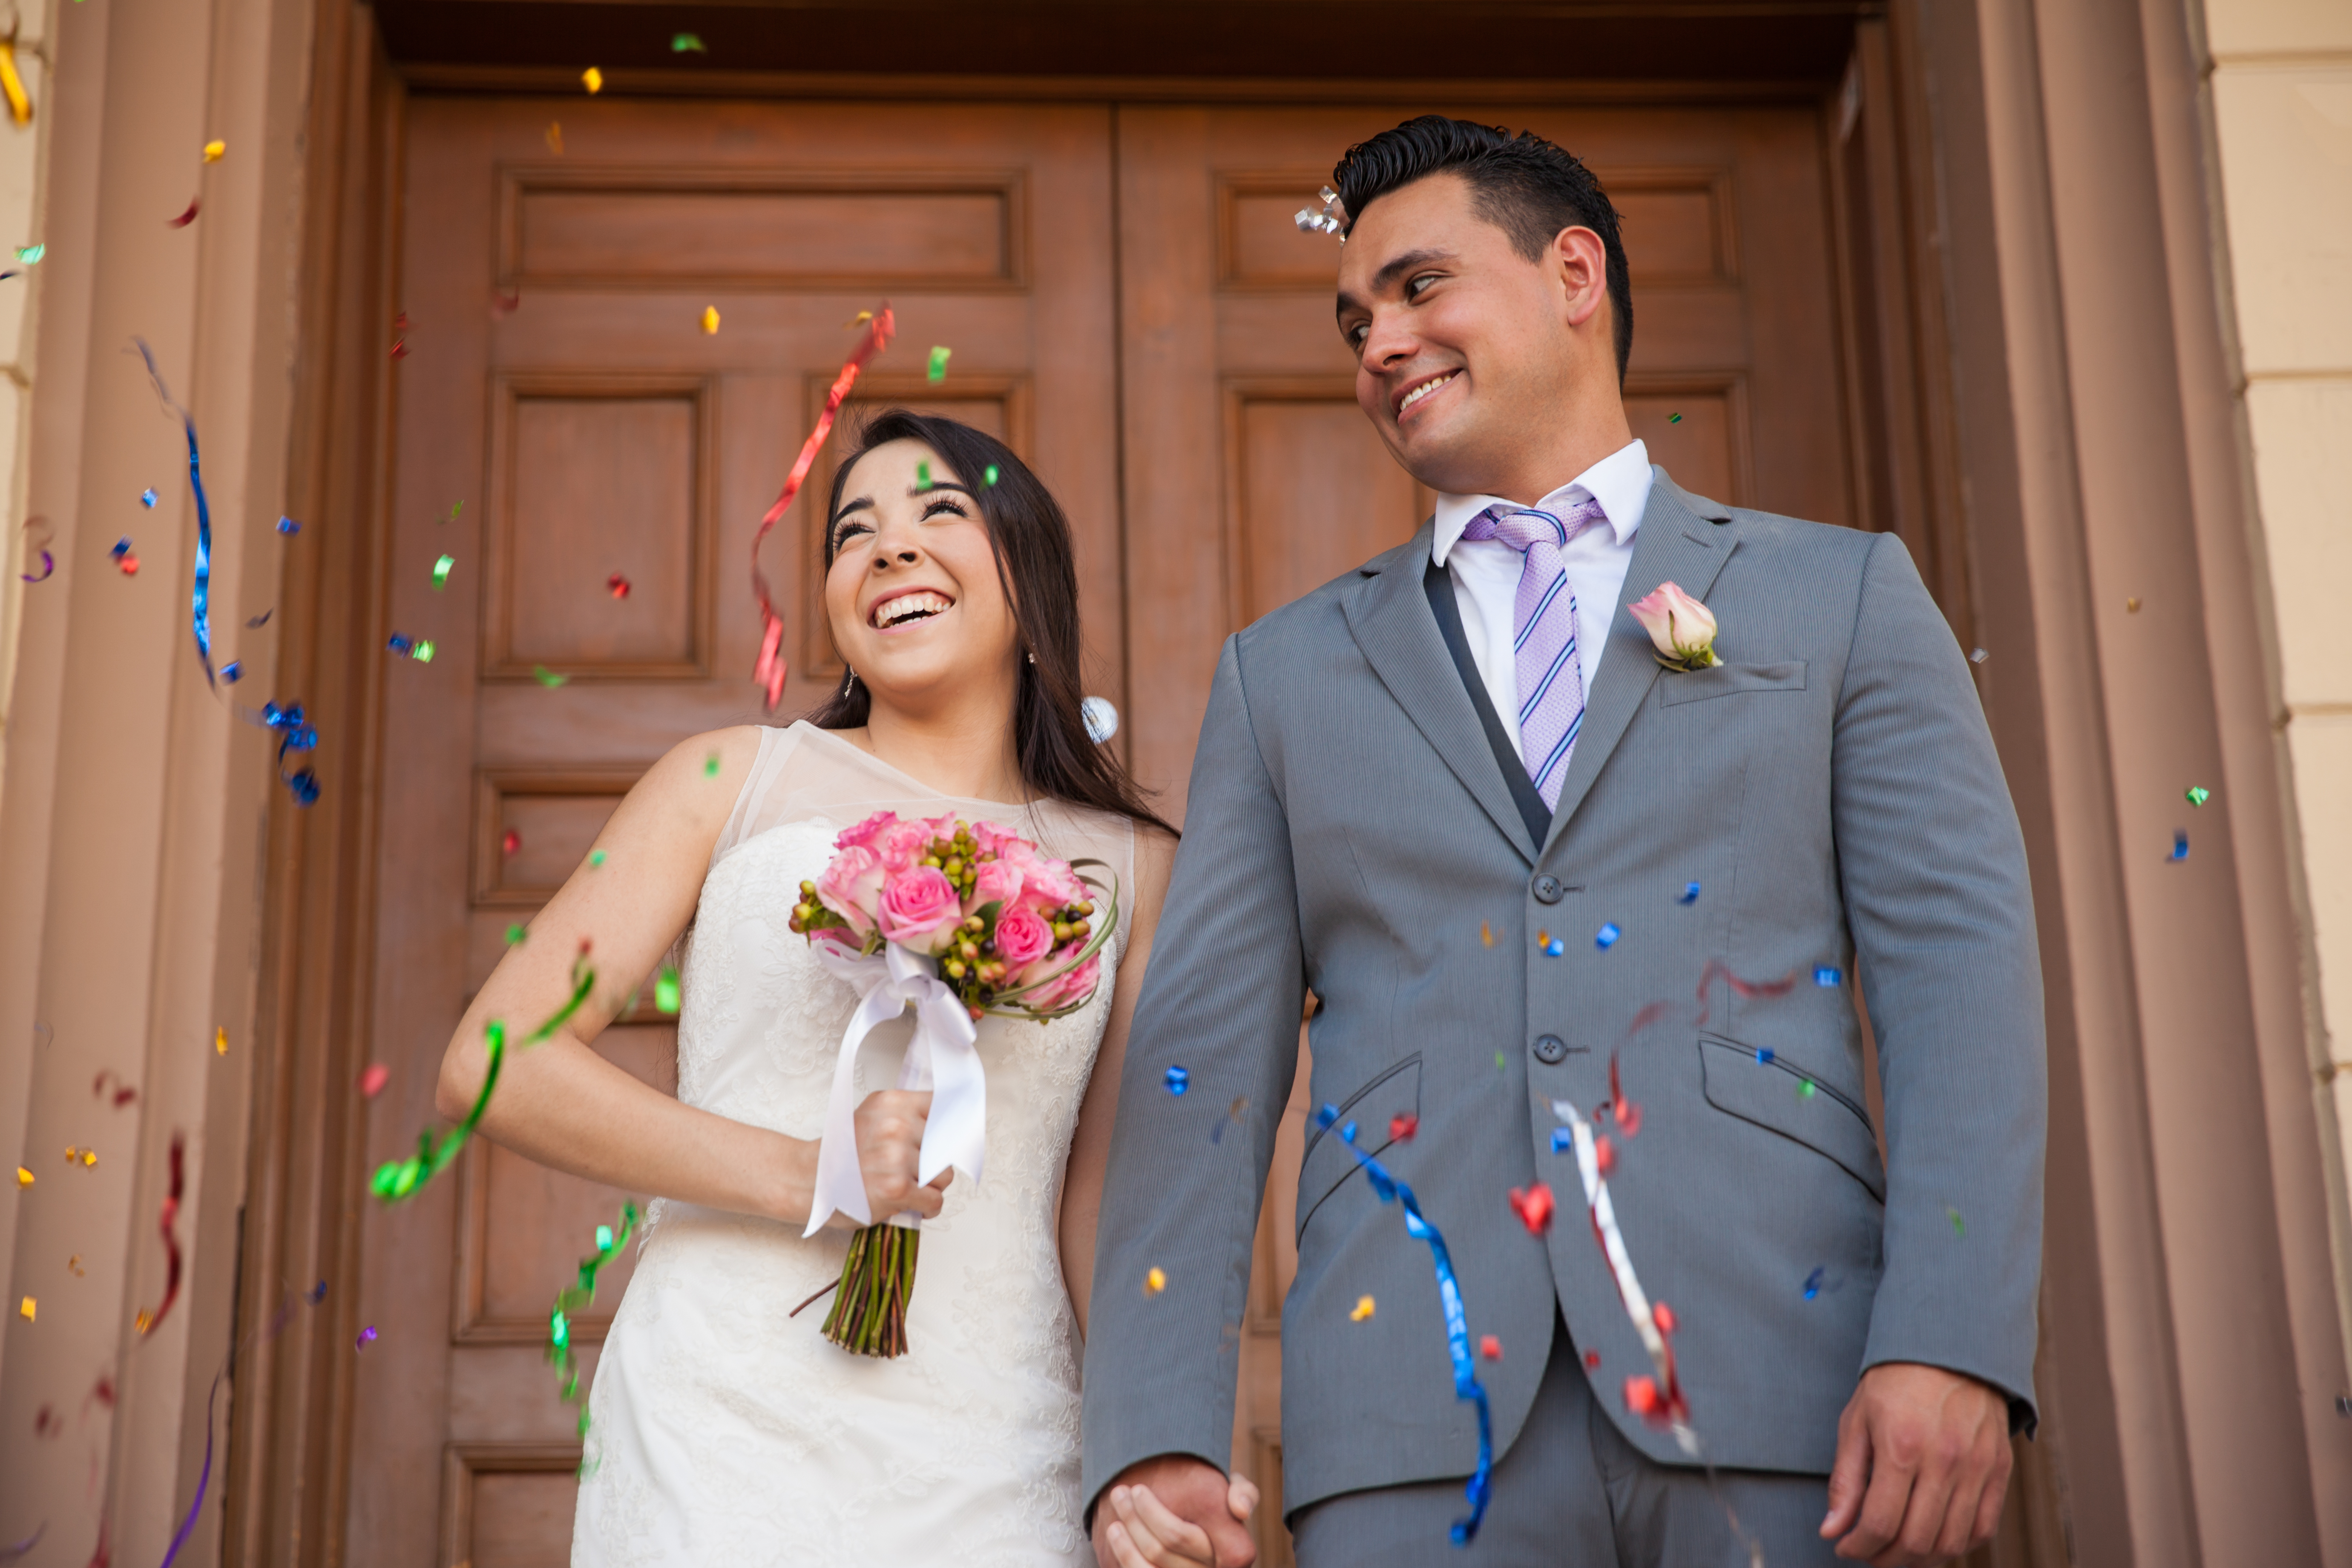 Bride and groom at a courthouse | Source: Shutterstock